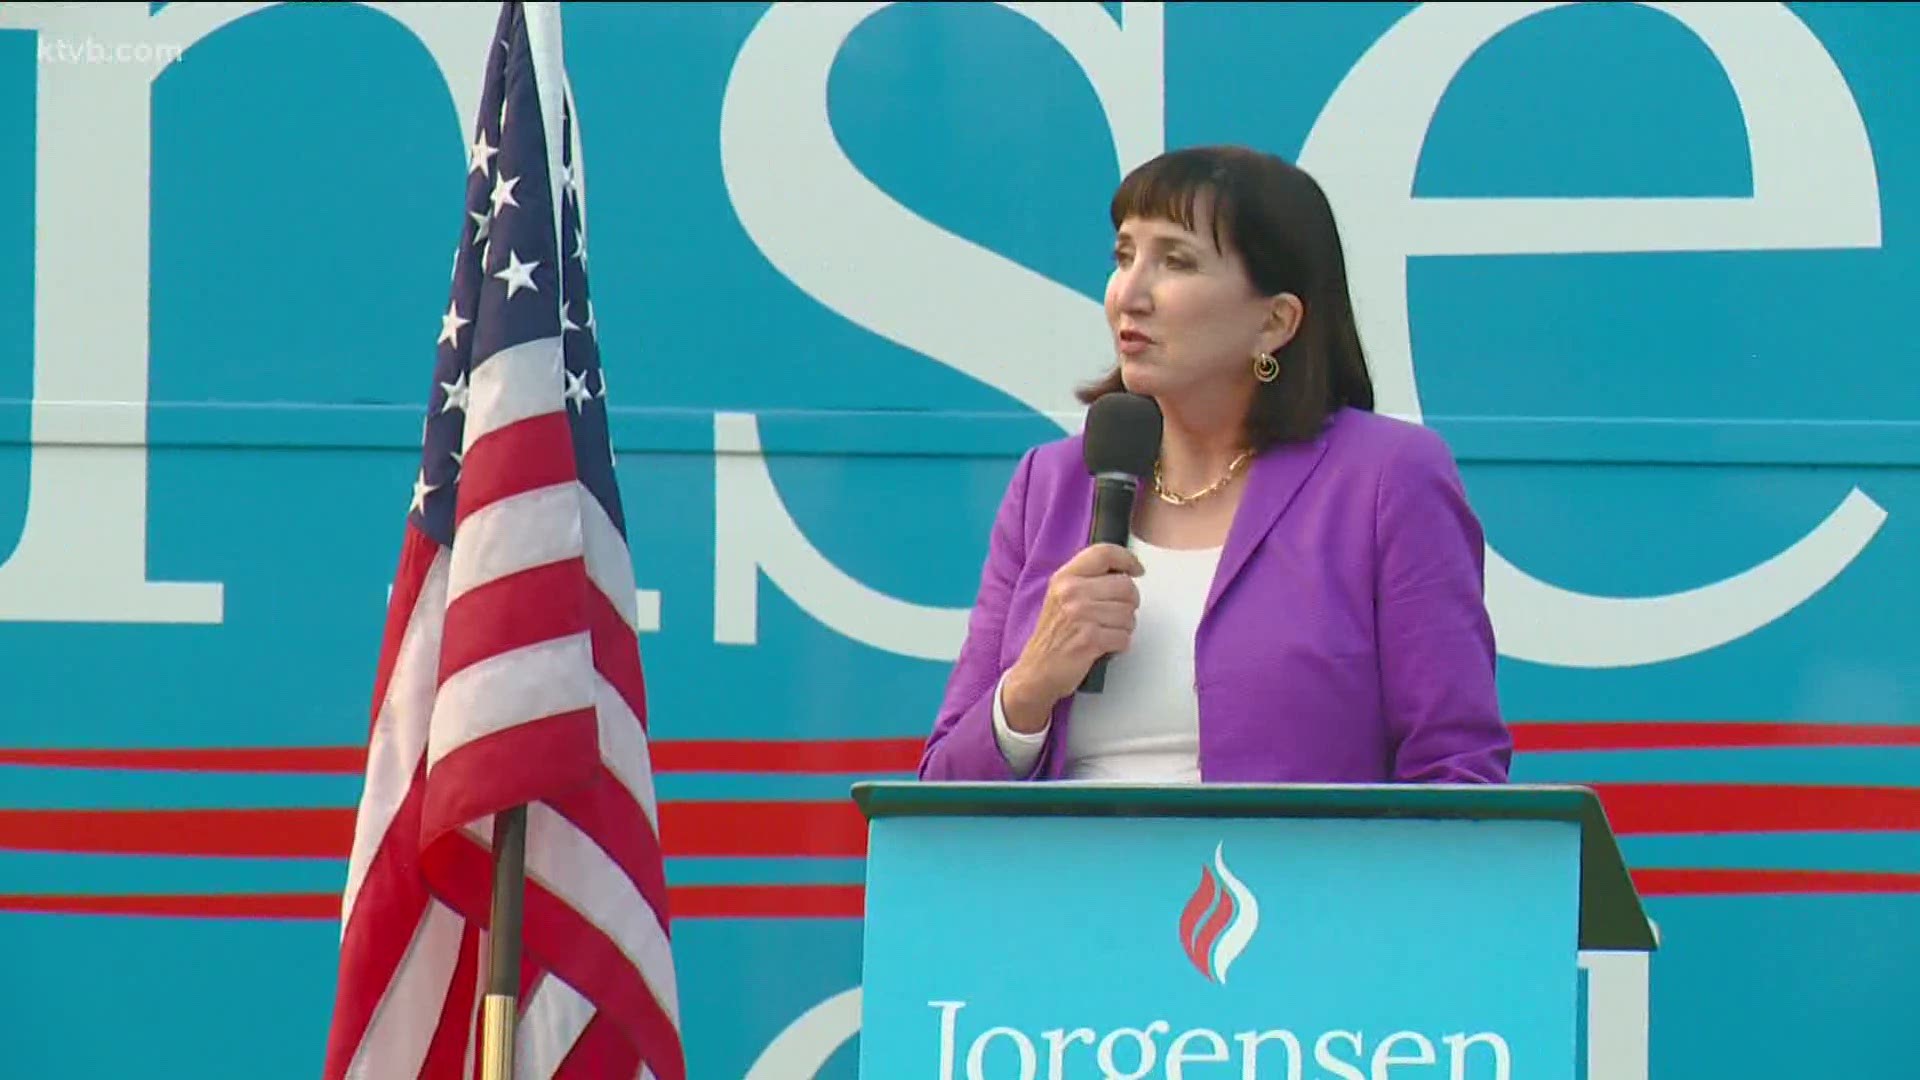 Dr. Jo Jorgensen is one of seven candidates who will appear on Idaho ballots Nov. 3.